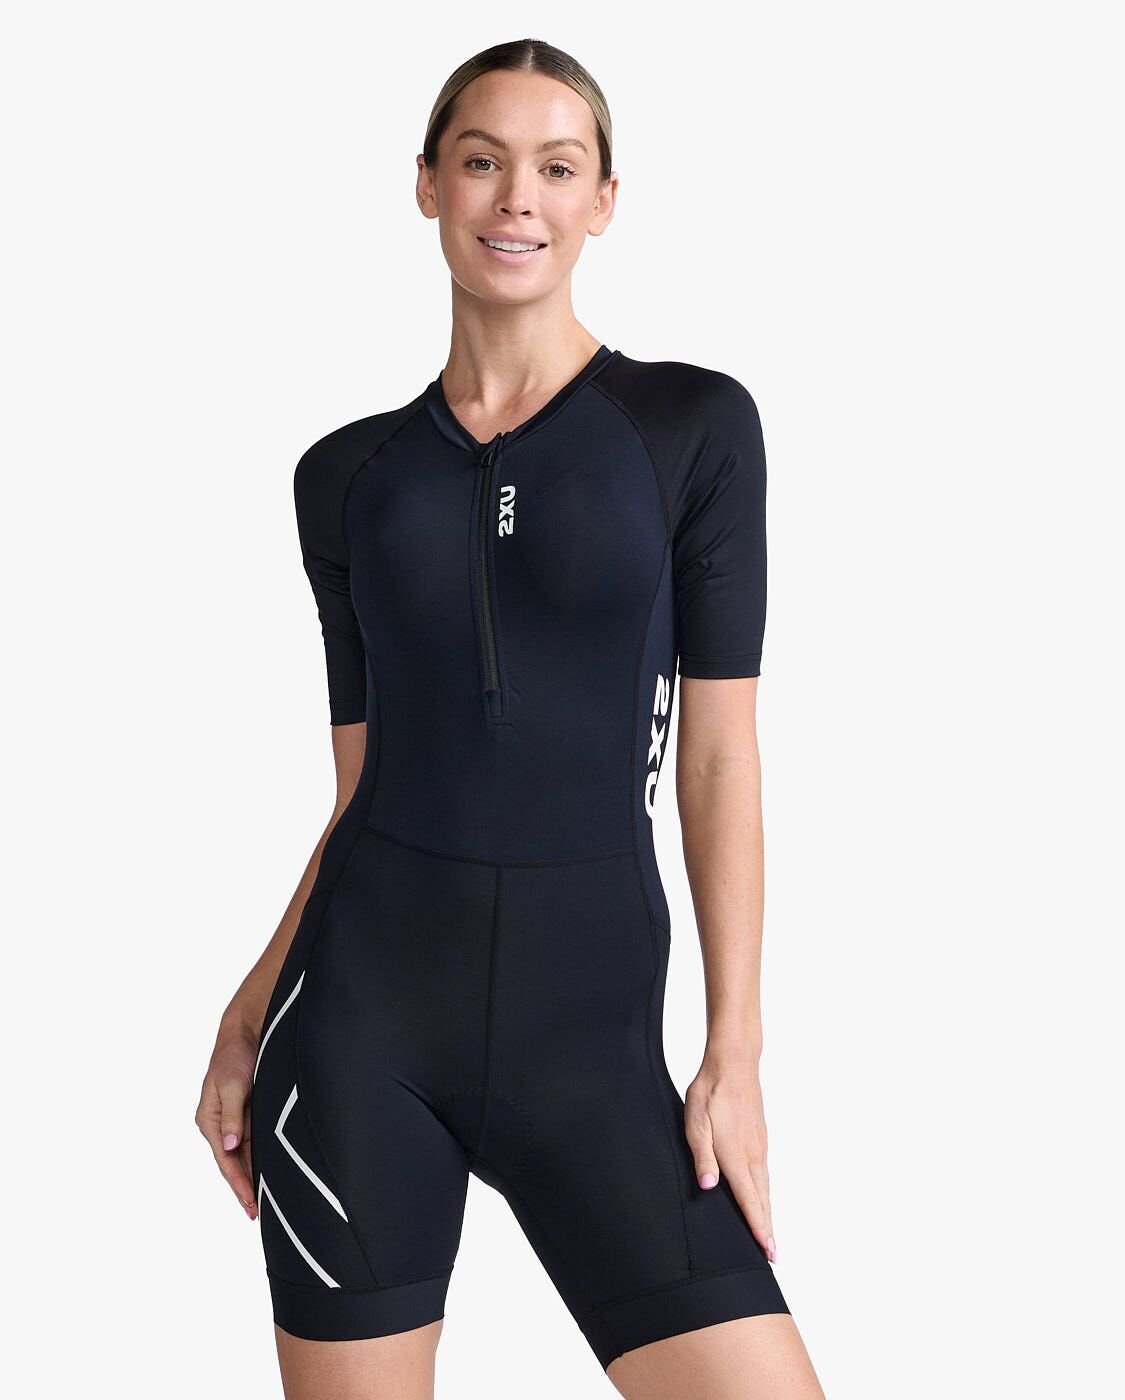 2XU South Africa - Womens Core Sleeved Trisuit - BLK/WHT